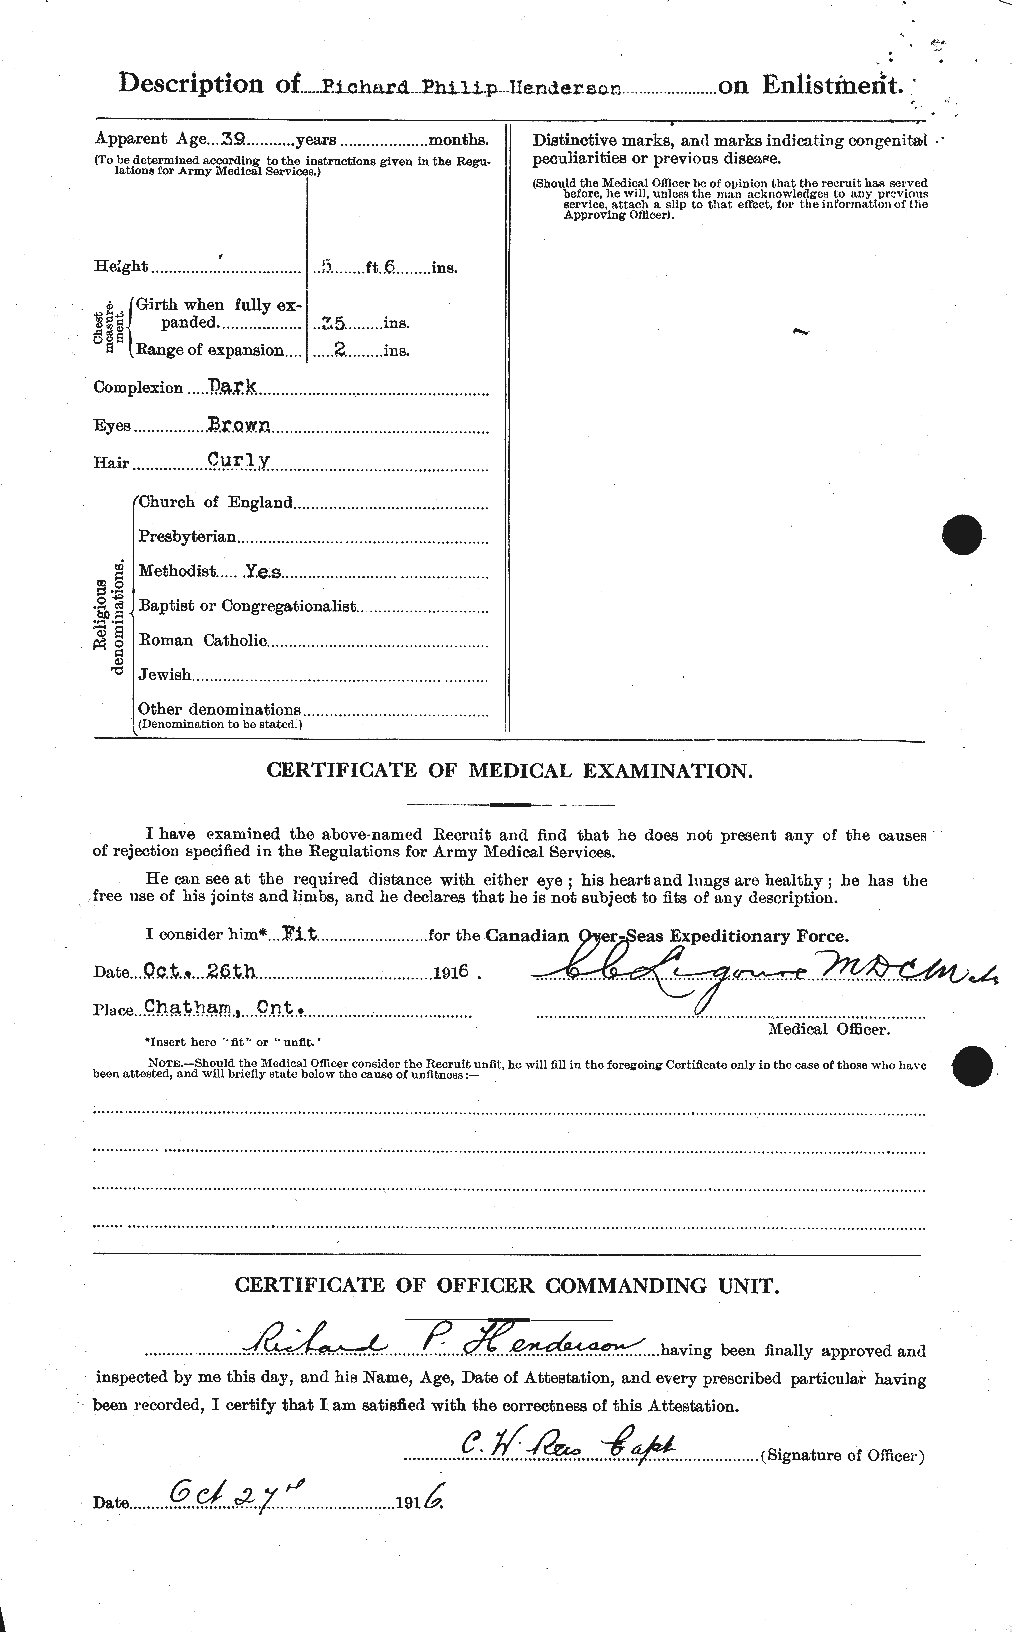 Personnel Records of the First World War - CEF 387320b